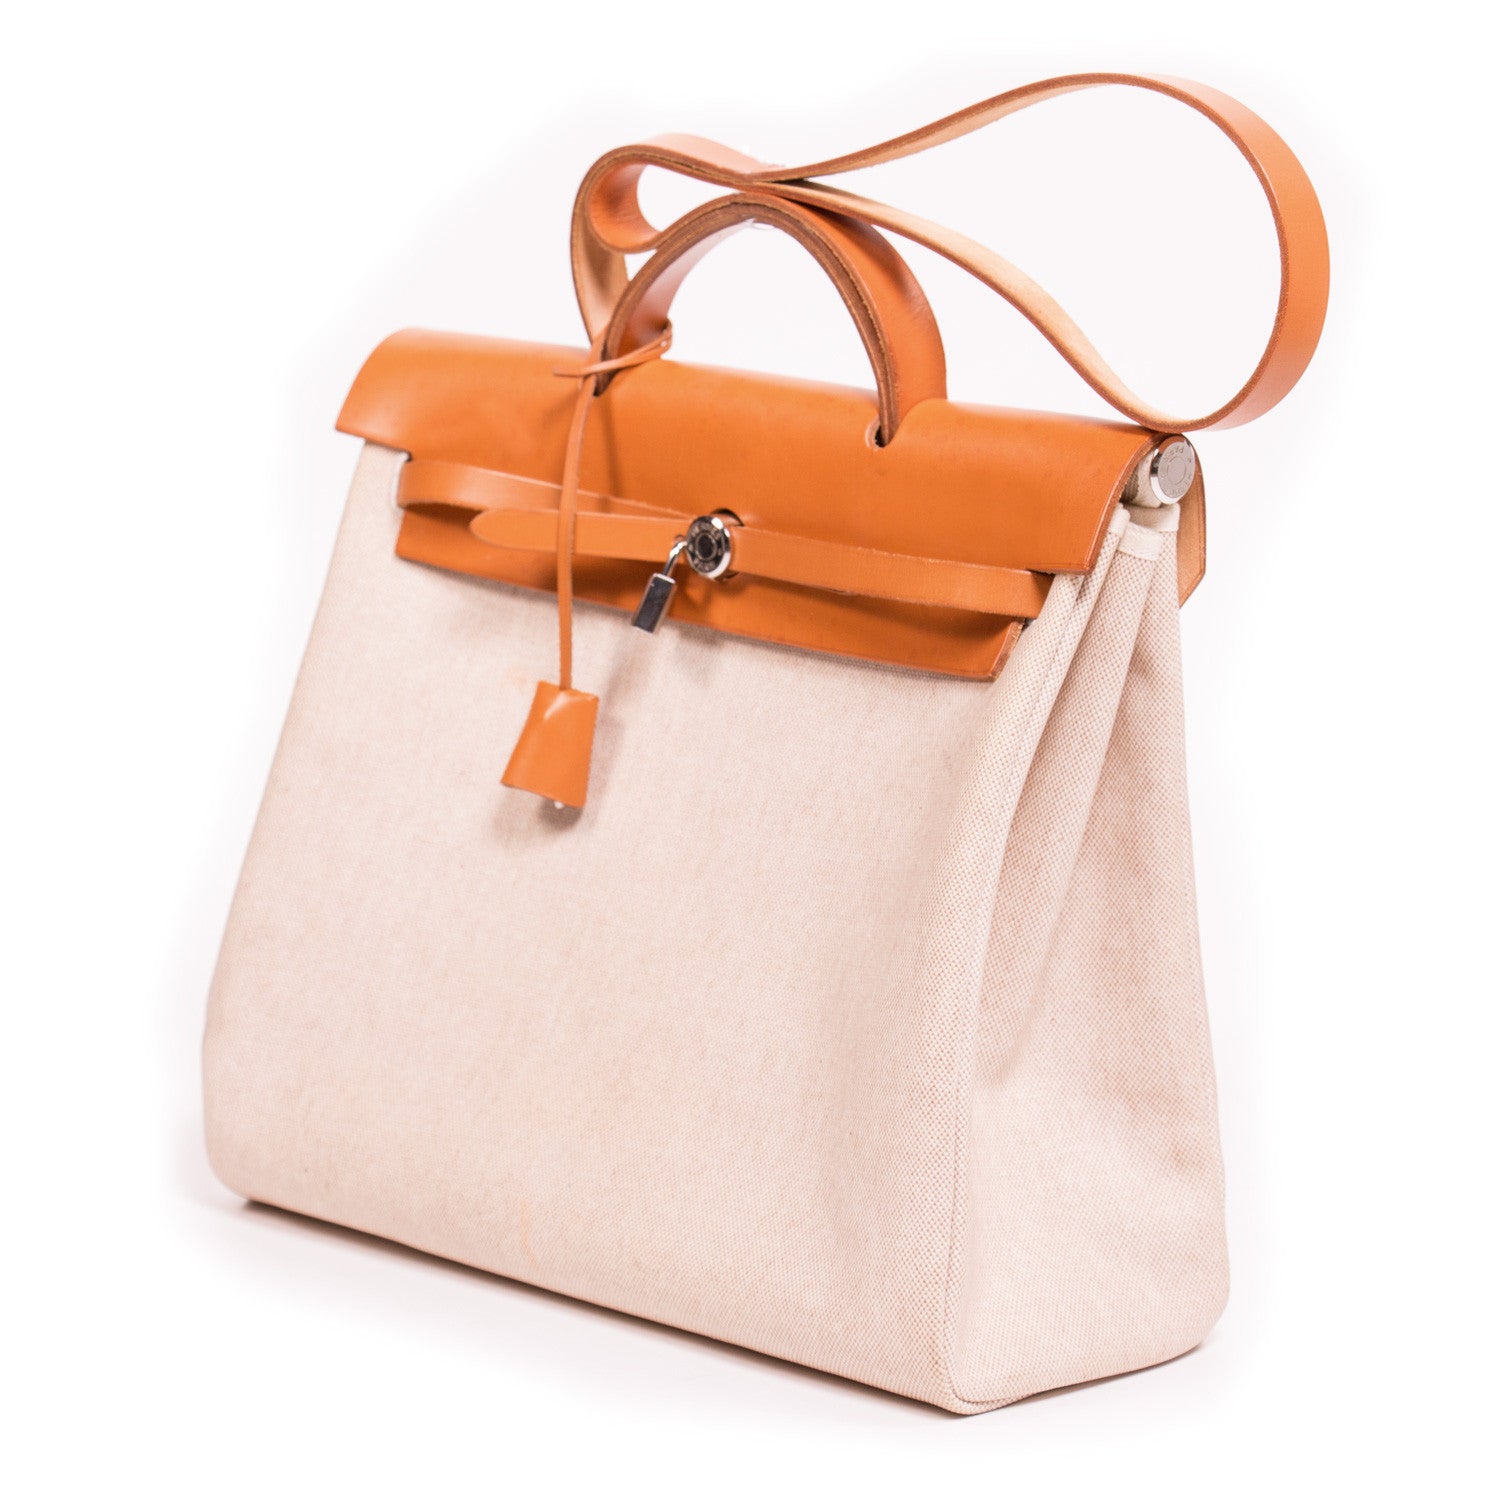 Shop authentic Hermes Herbag GM at revogue for just USD 1,399.00